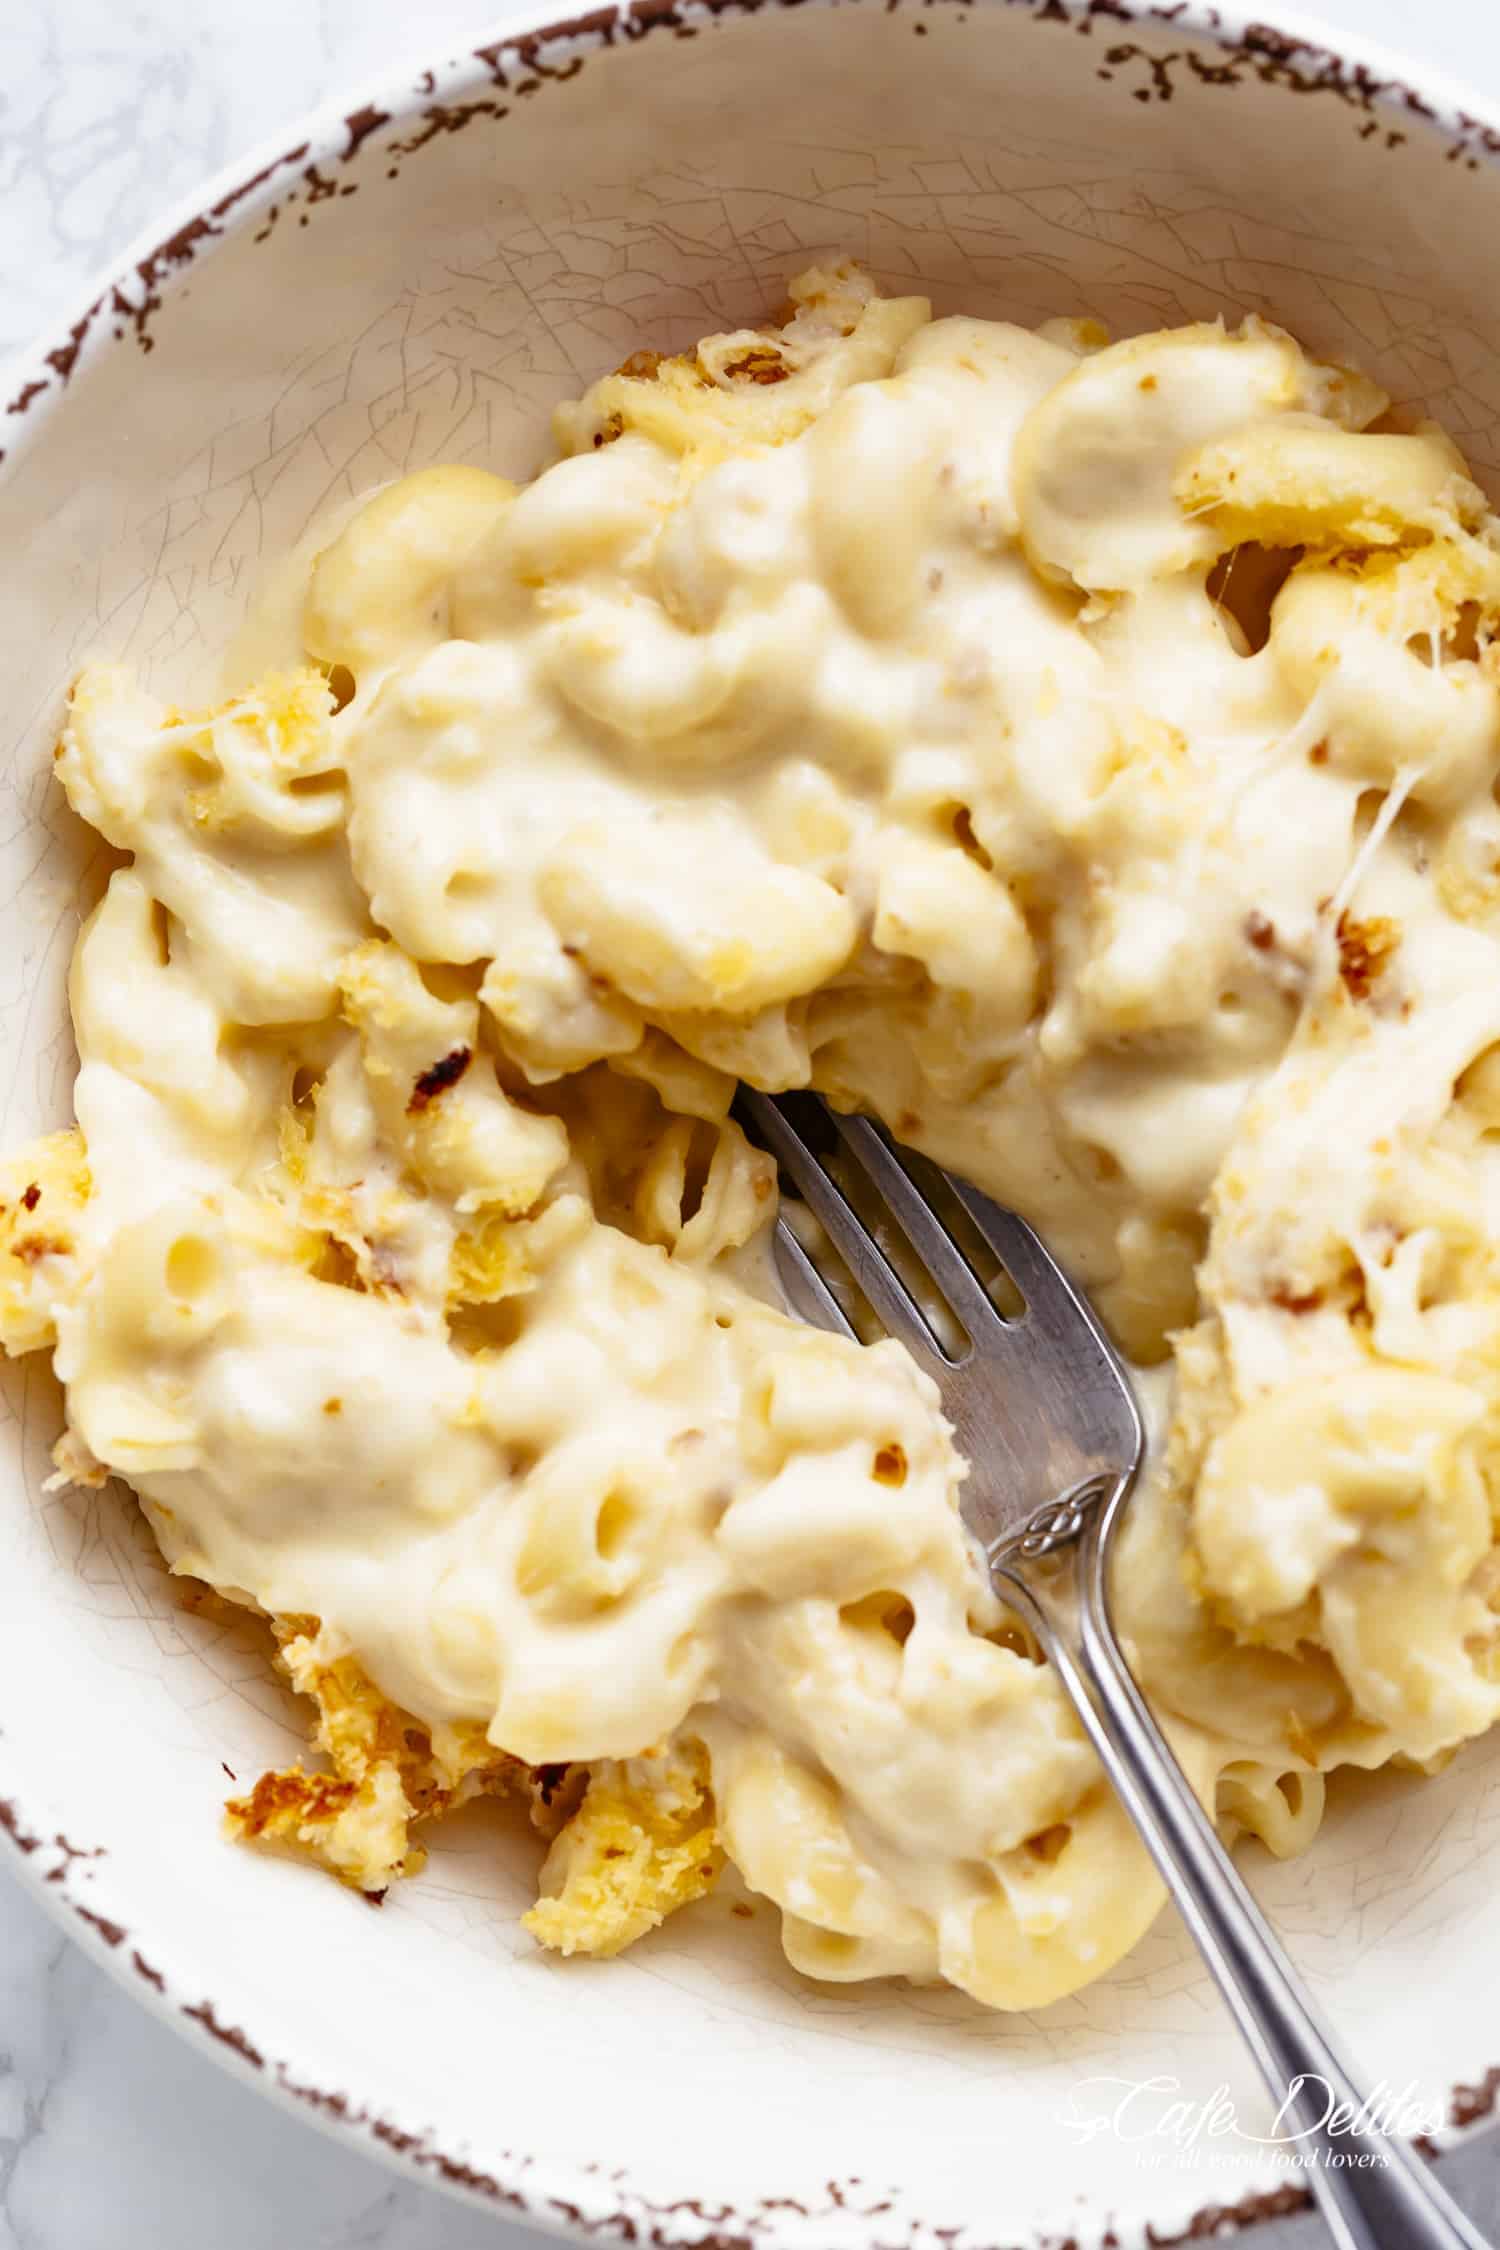 Mac And Cheese is better than the original! A creamy garlic parmesan cheese sauce coats your macaroni, topped with parmesan fried bread crumbs, while saving some calories! | https://cafedelites.com